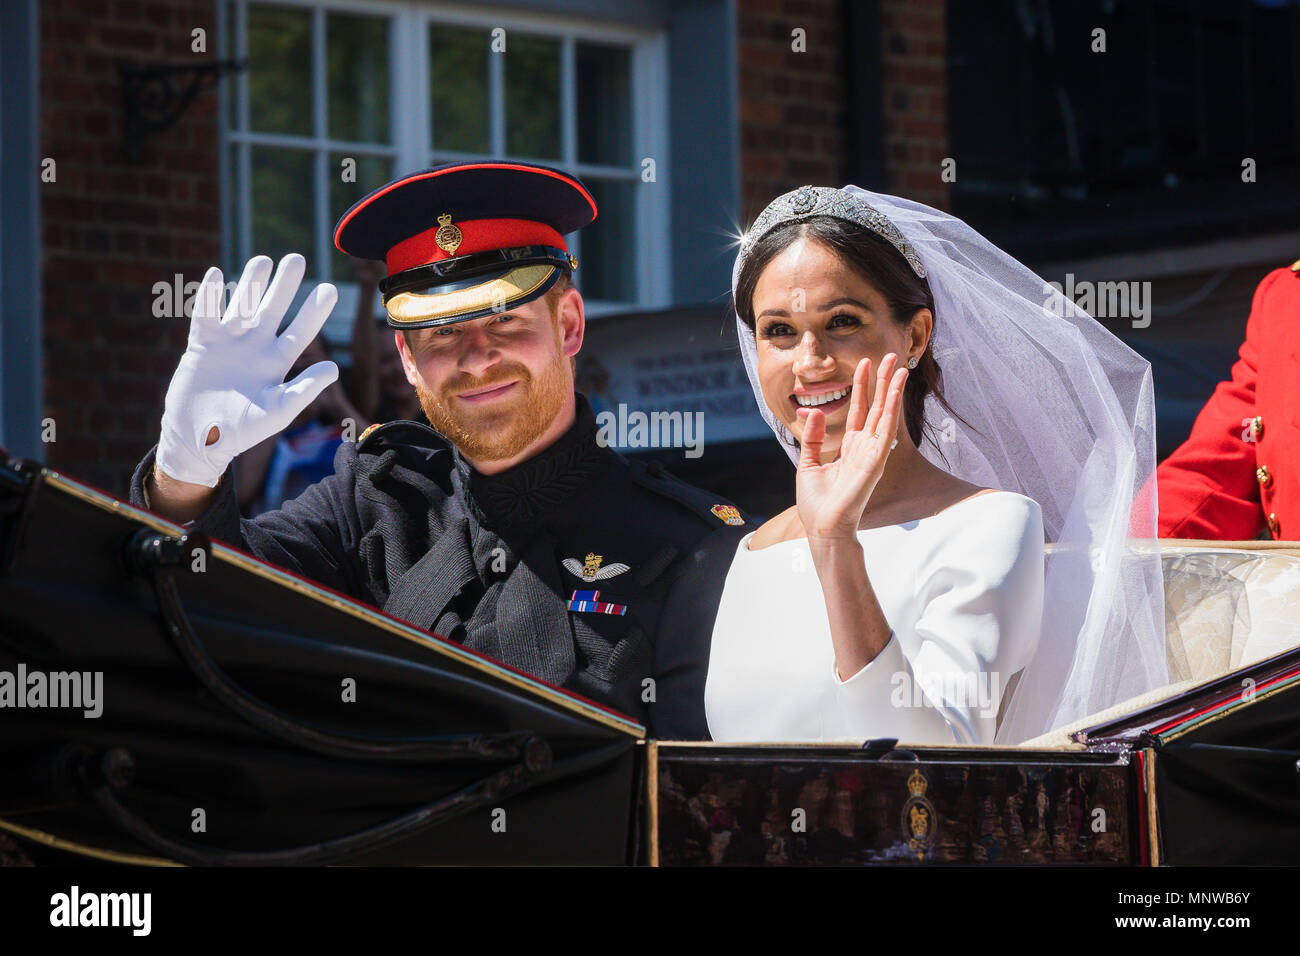 Windsor, UK, 19 May 2018. Prince Harry and his bride Meghan Markle ride around the streets of Windsor in a state Landau greeted by huge crowds cheering and waving flags following their wedding at St Georges Chapel. Before heading back to Windsor castle for their wedding reception. They will now be know as The Duke and Duchess of Sussex Stock Photo